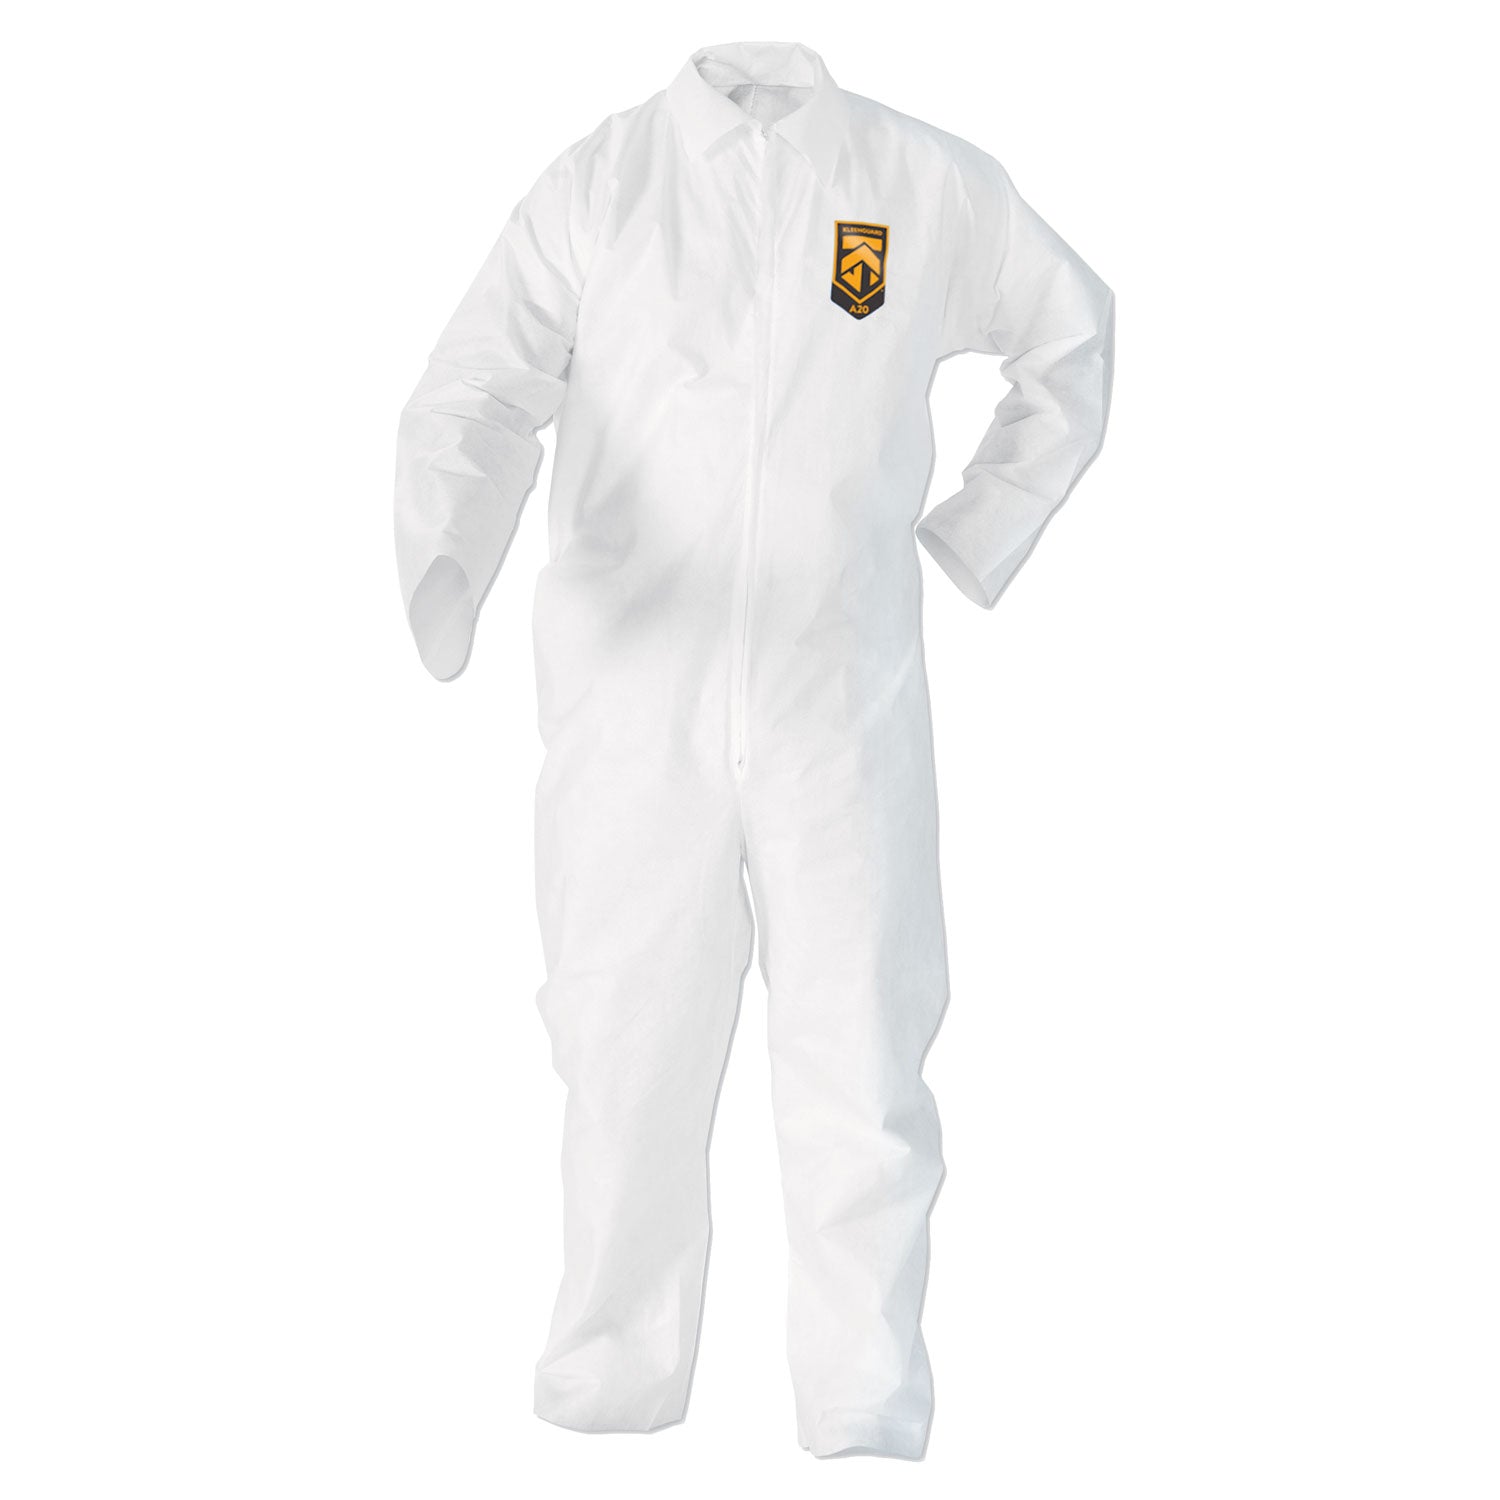 a20-breathable-particle-protection-coveralls-zip-closure-2x-large-white_kcc49105 - 1